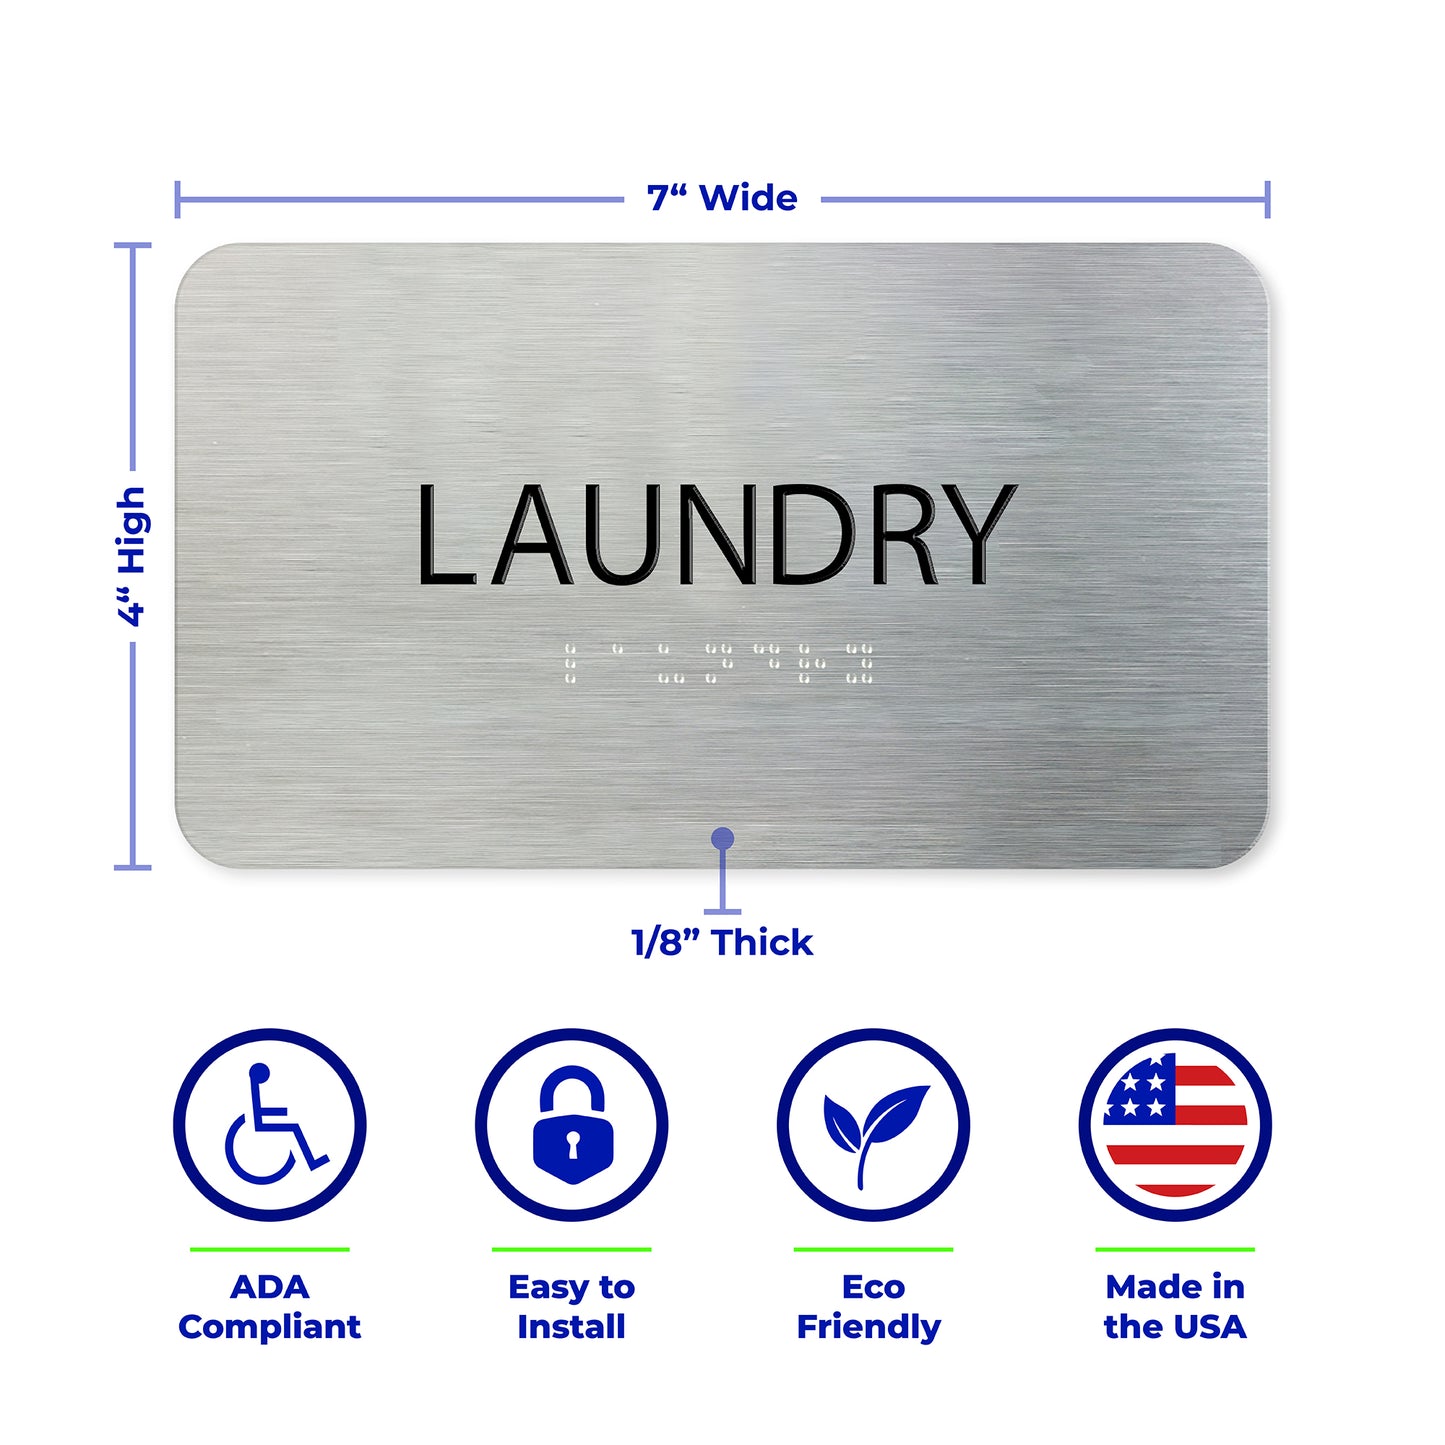 LAUNDRY Sign, ADA Compliant, Business Signs, Aluminum Brushed Silver, Black Raised Text, Grade 2 Braille, 7 "x 4"